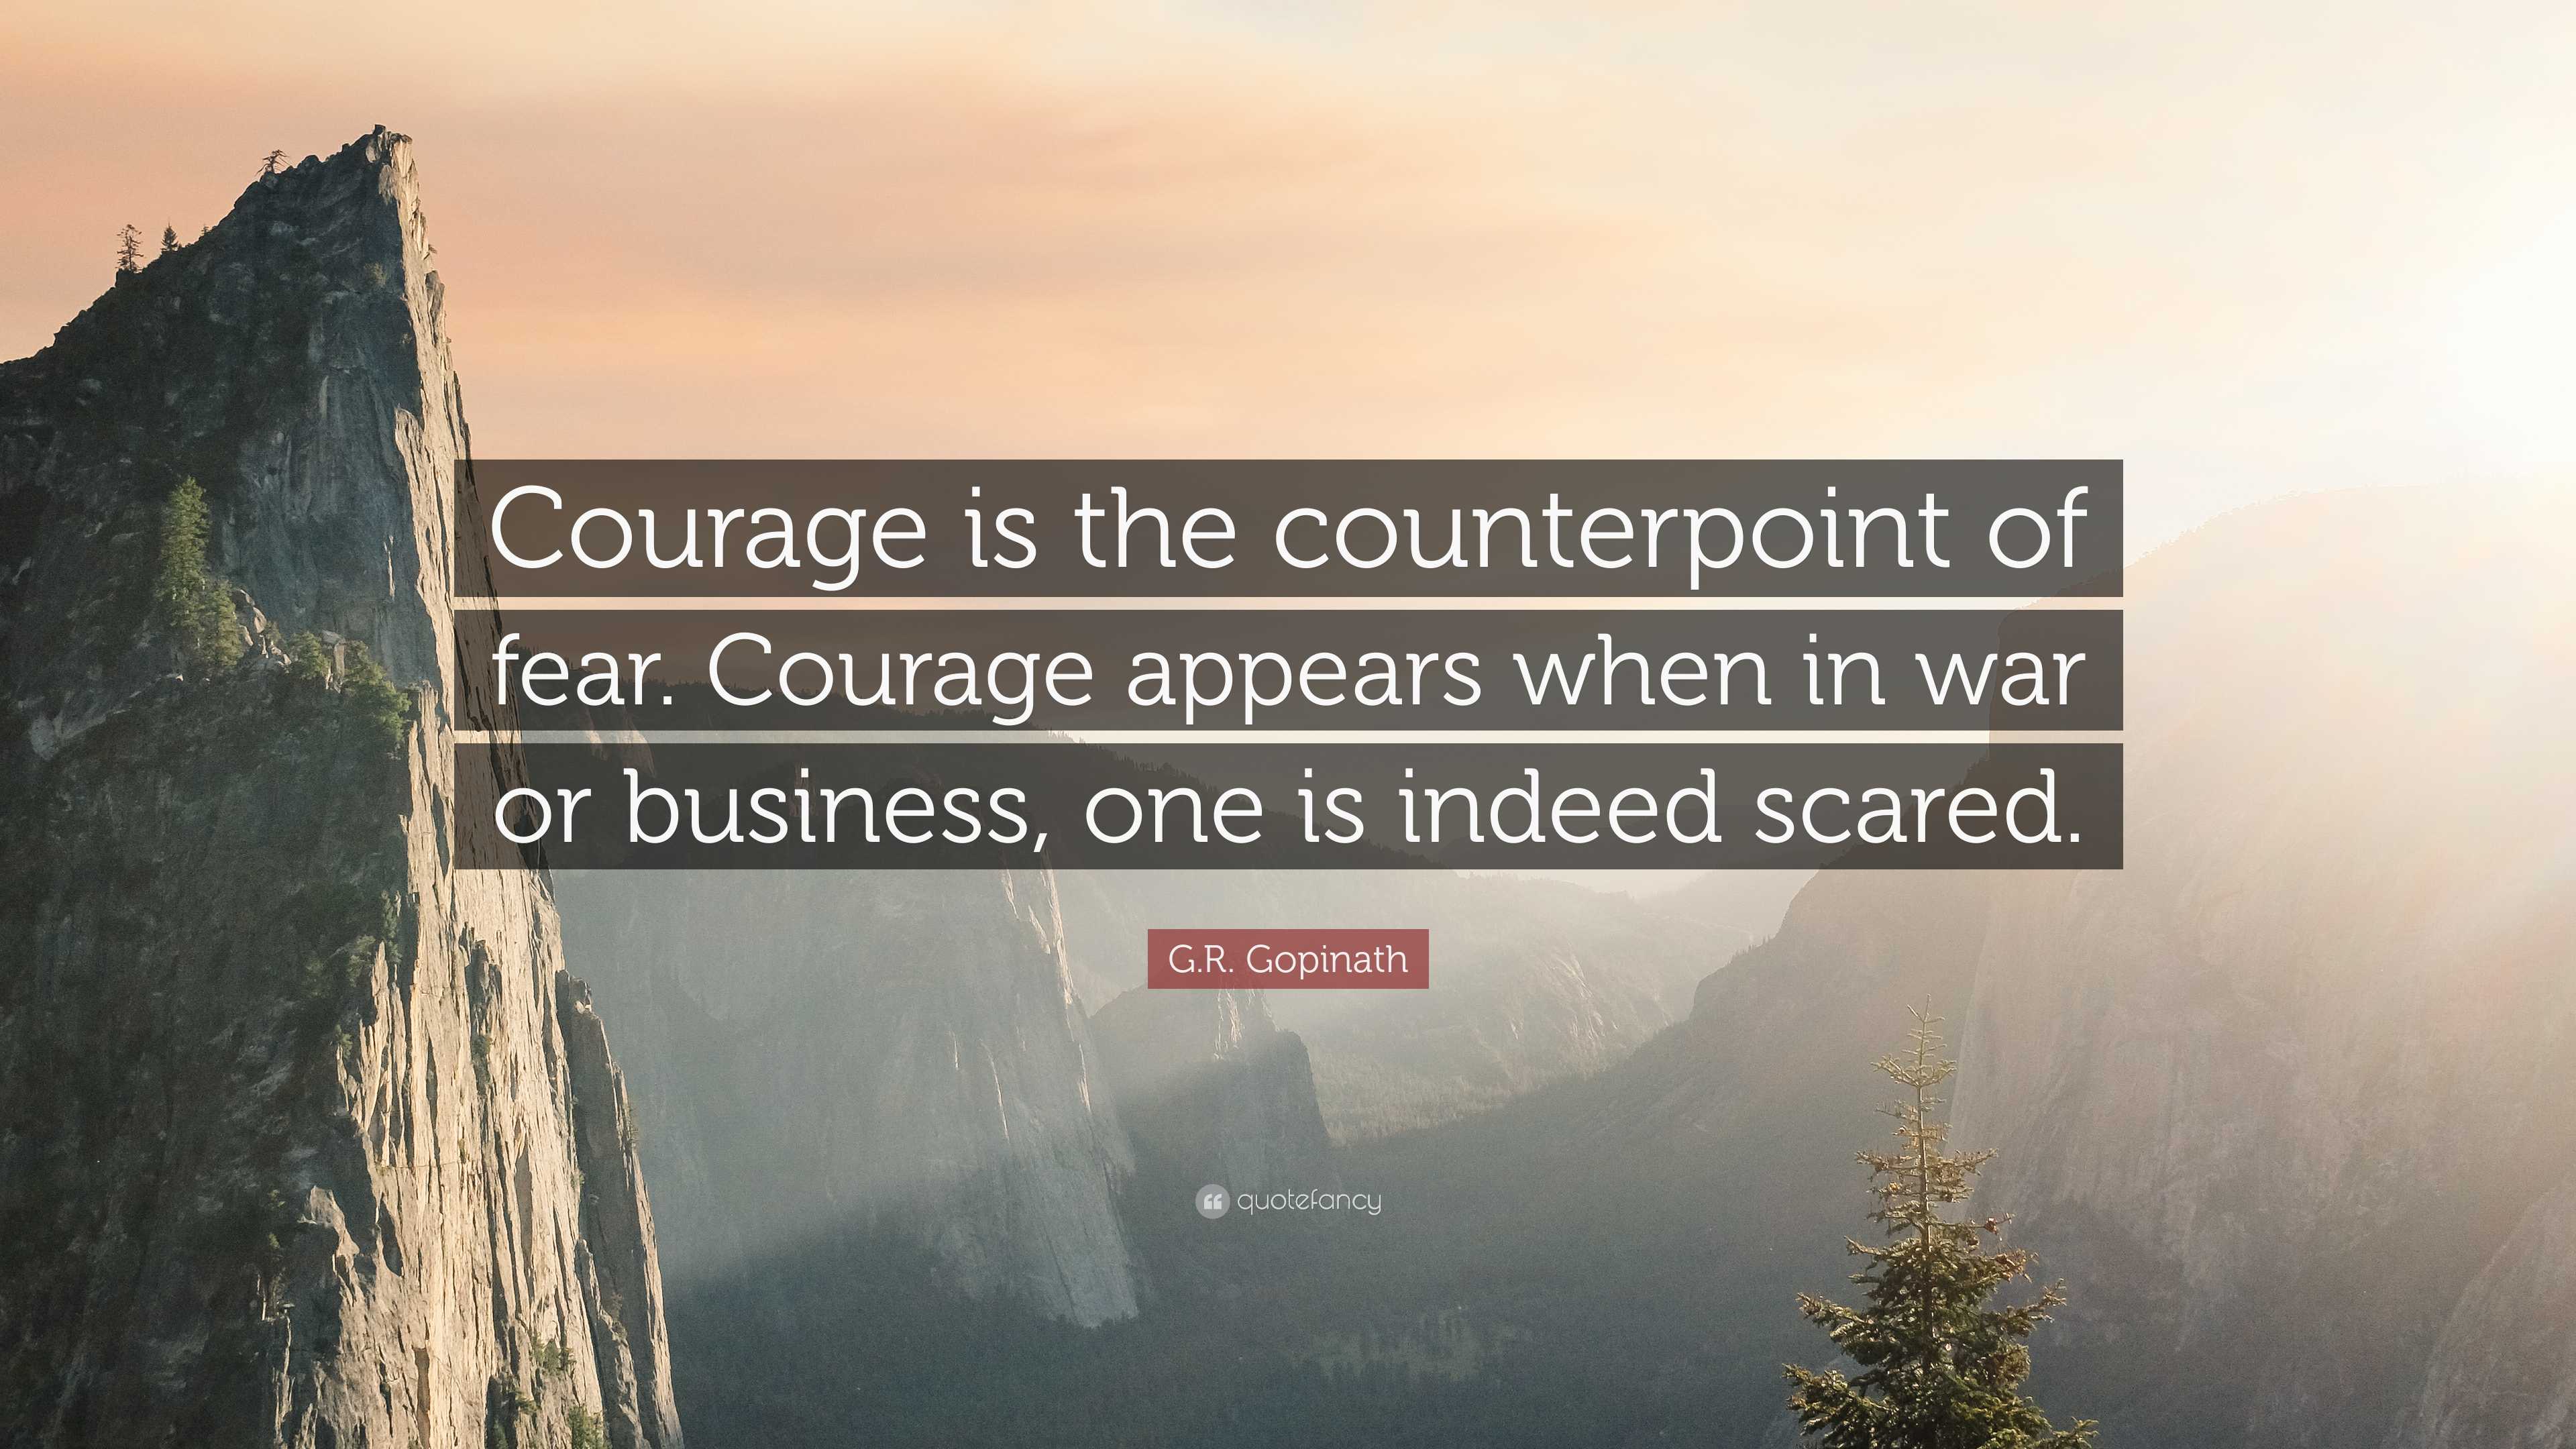 G.R. Gopinath Quote: “Courage is the counterpoint of fear. Courage ...